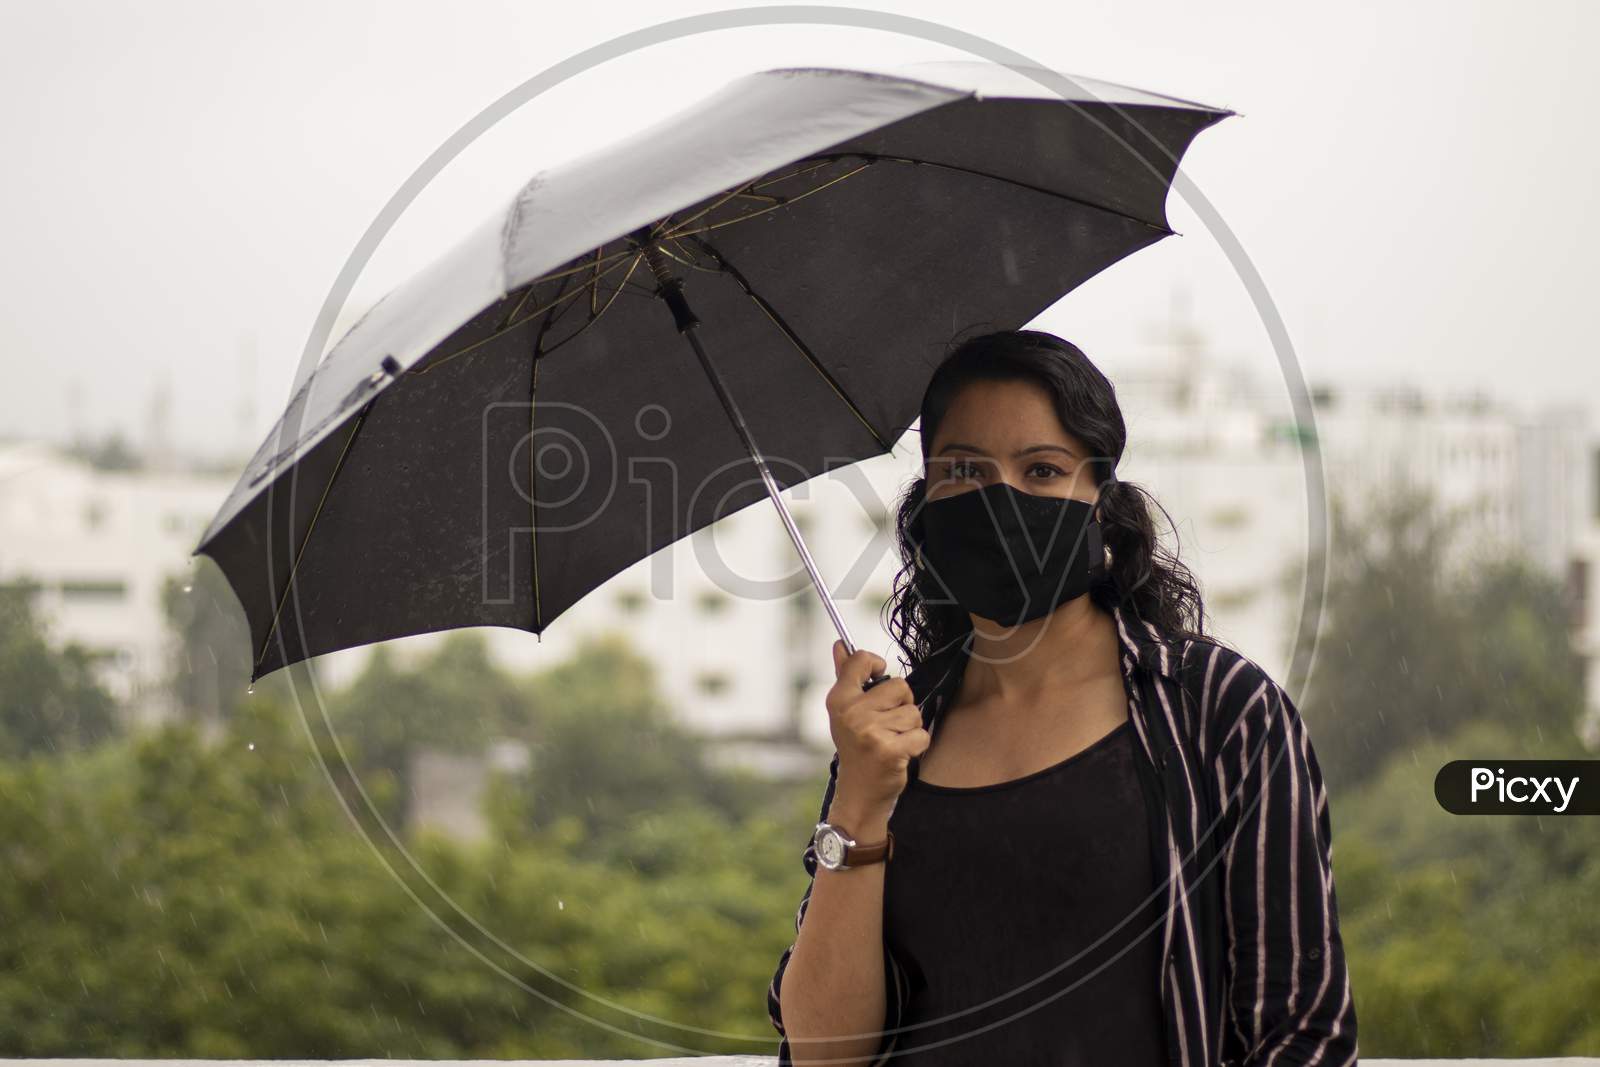 Indian Woman With Umbrella In The Rain. Looking At Camera.Covid-19 Pandemic Coronavirus A Young Indian Woman In A Protective Black Mask For The Spread Of The Sars-Cov-2 Disease Virus.